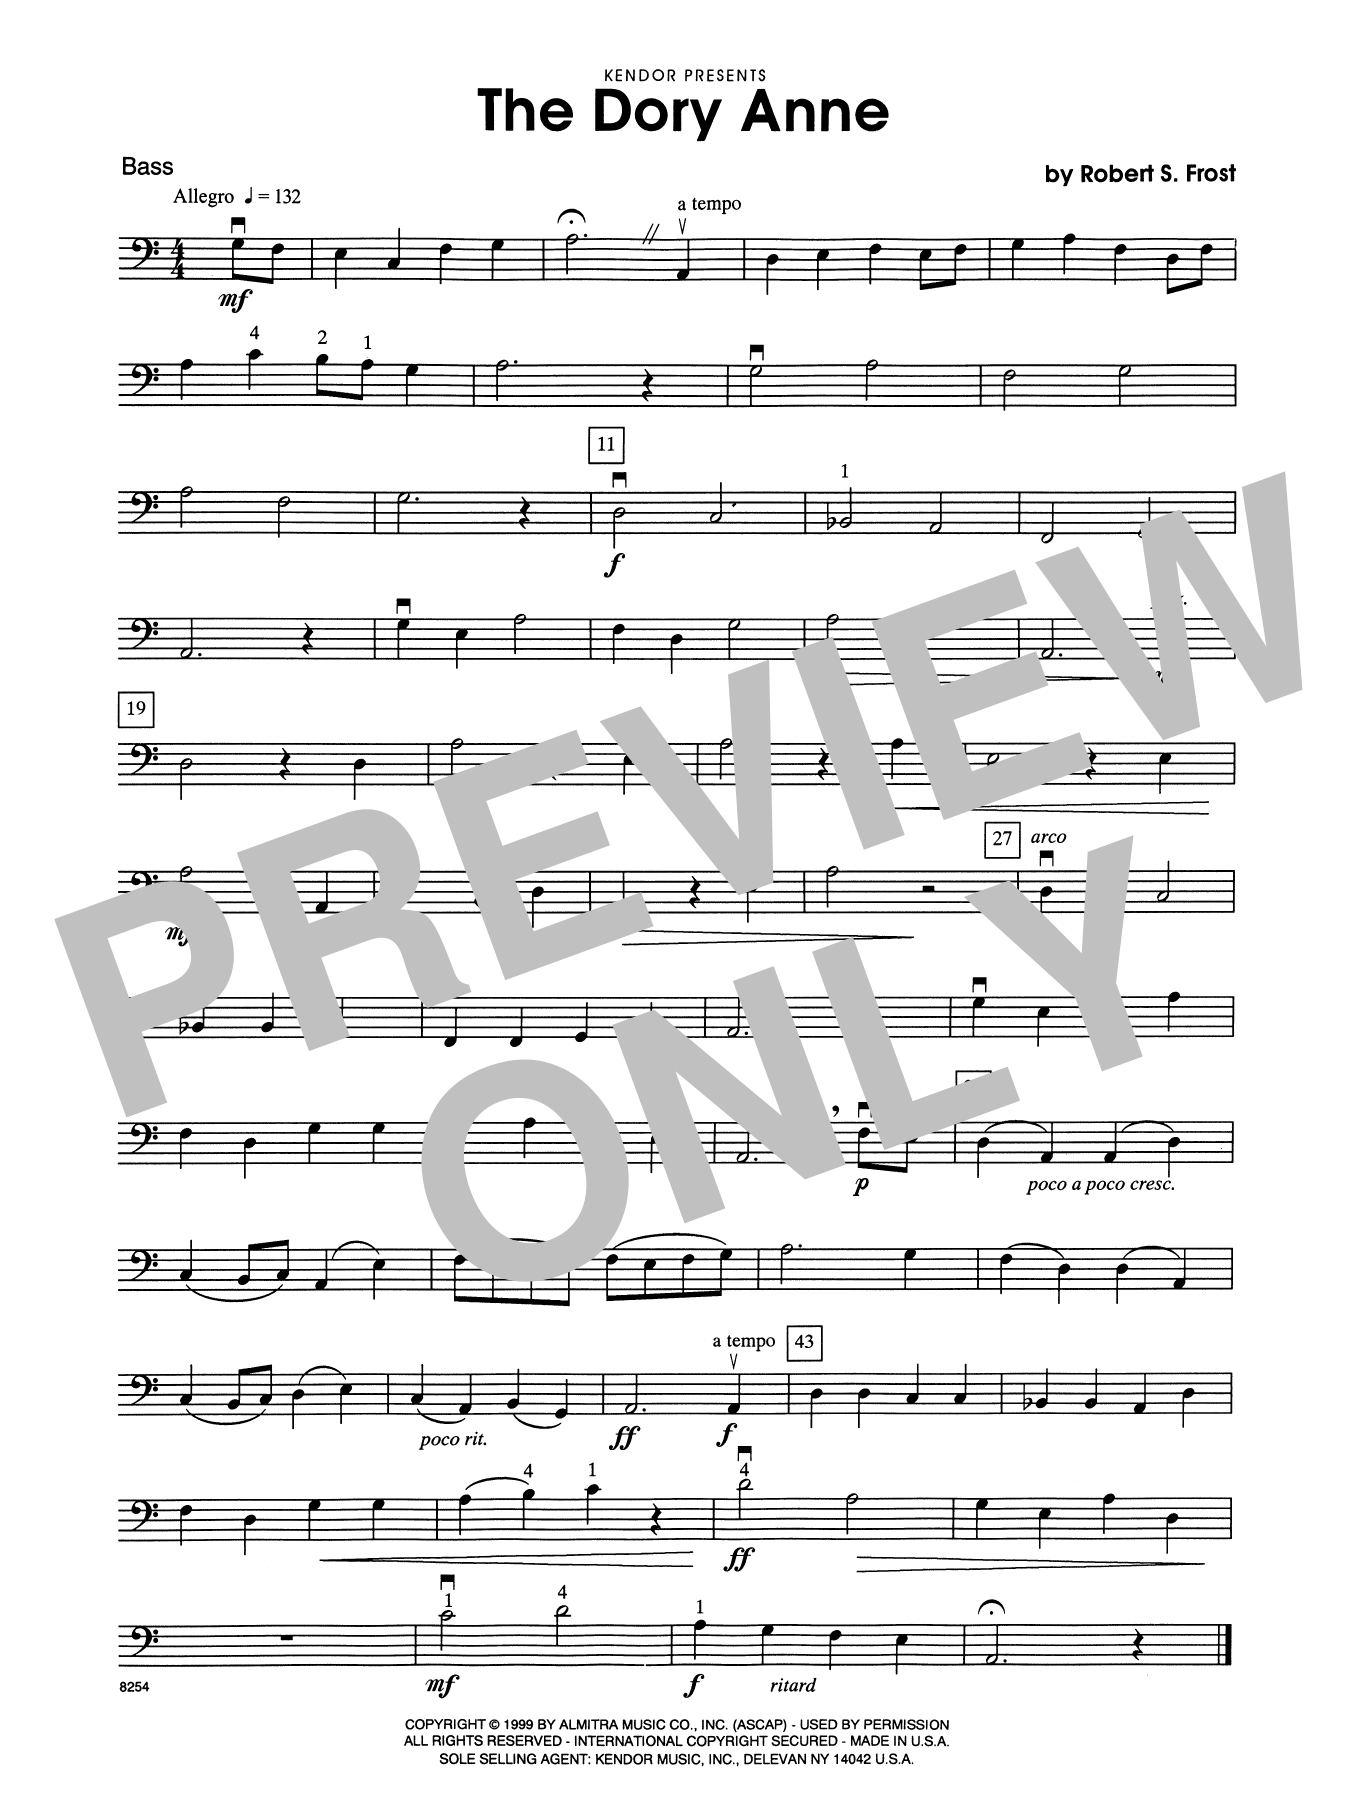 Download Robert S. Frost The Dory Anne - Bass Sheet Music